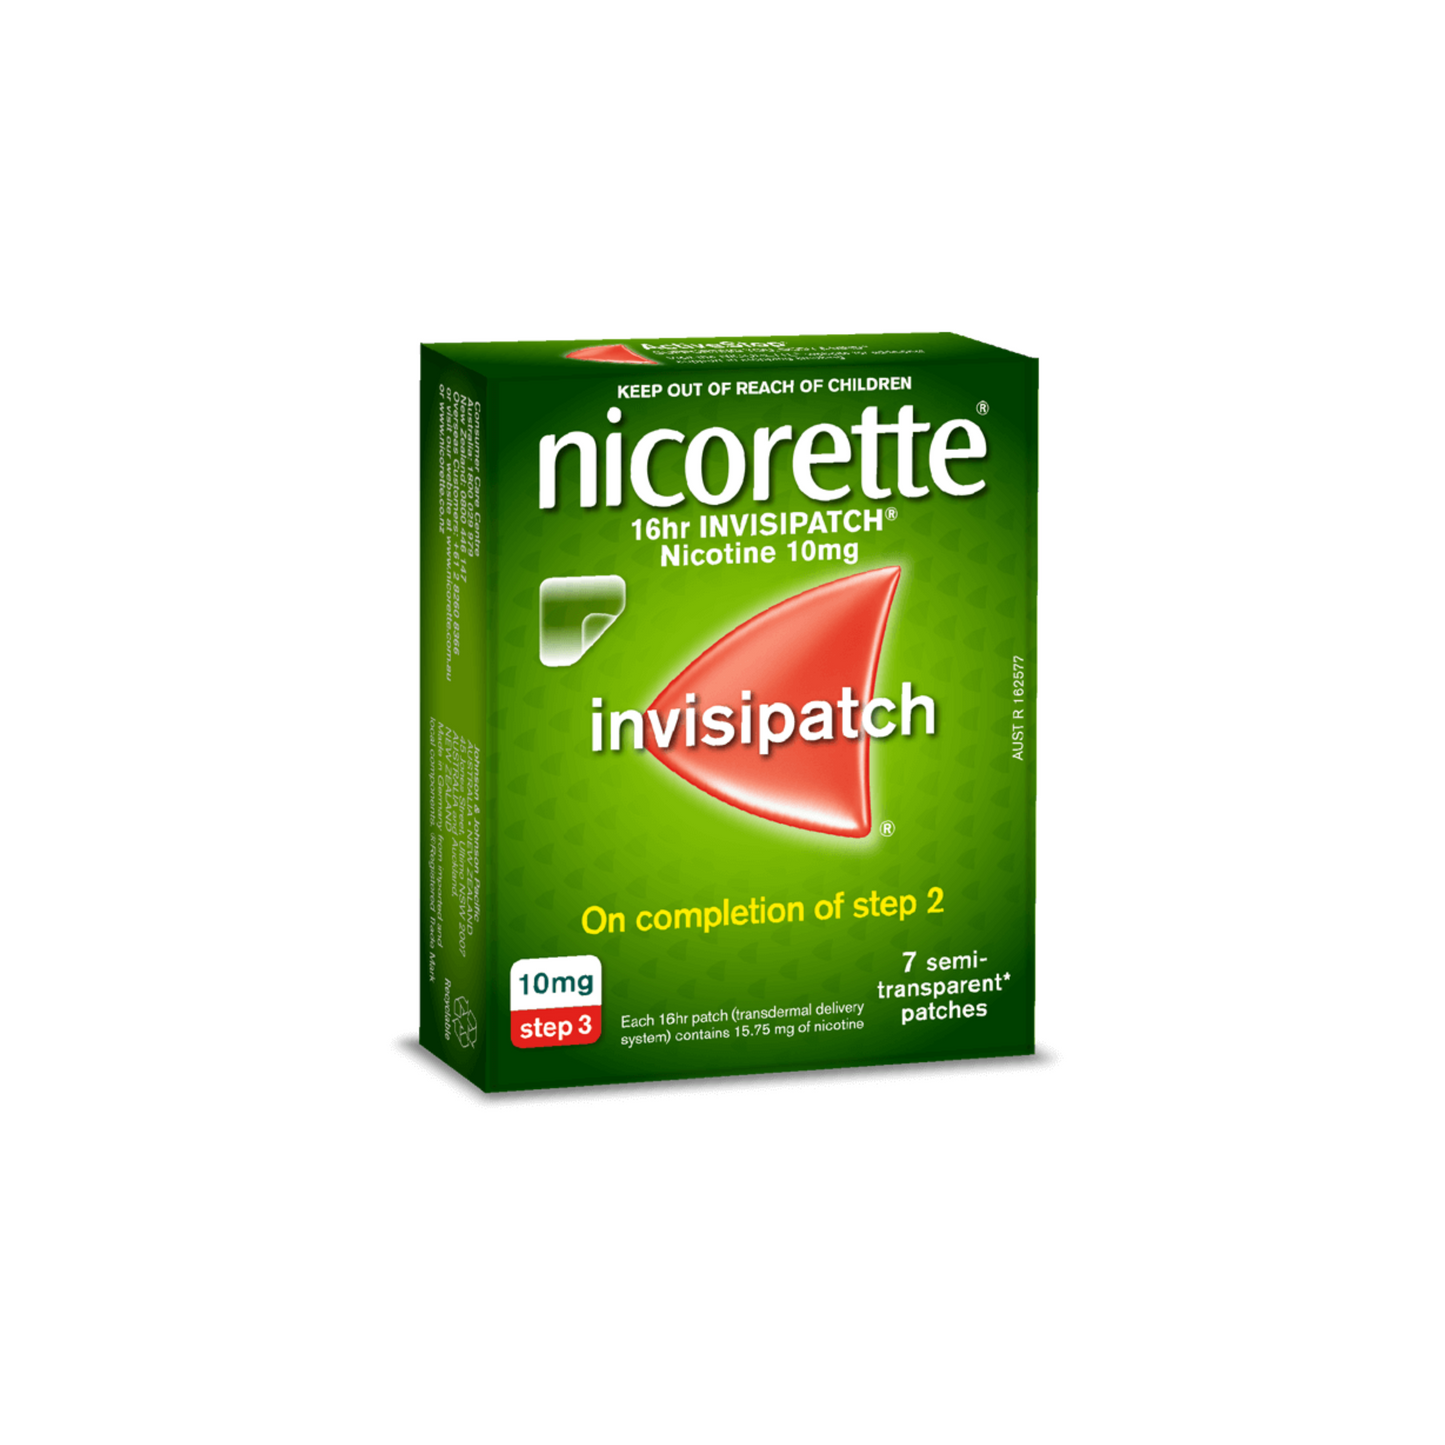 Nicorette Quit Smoking 16hr Invisipatch Step 3 10mg 7 pack